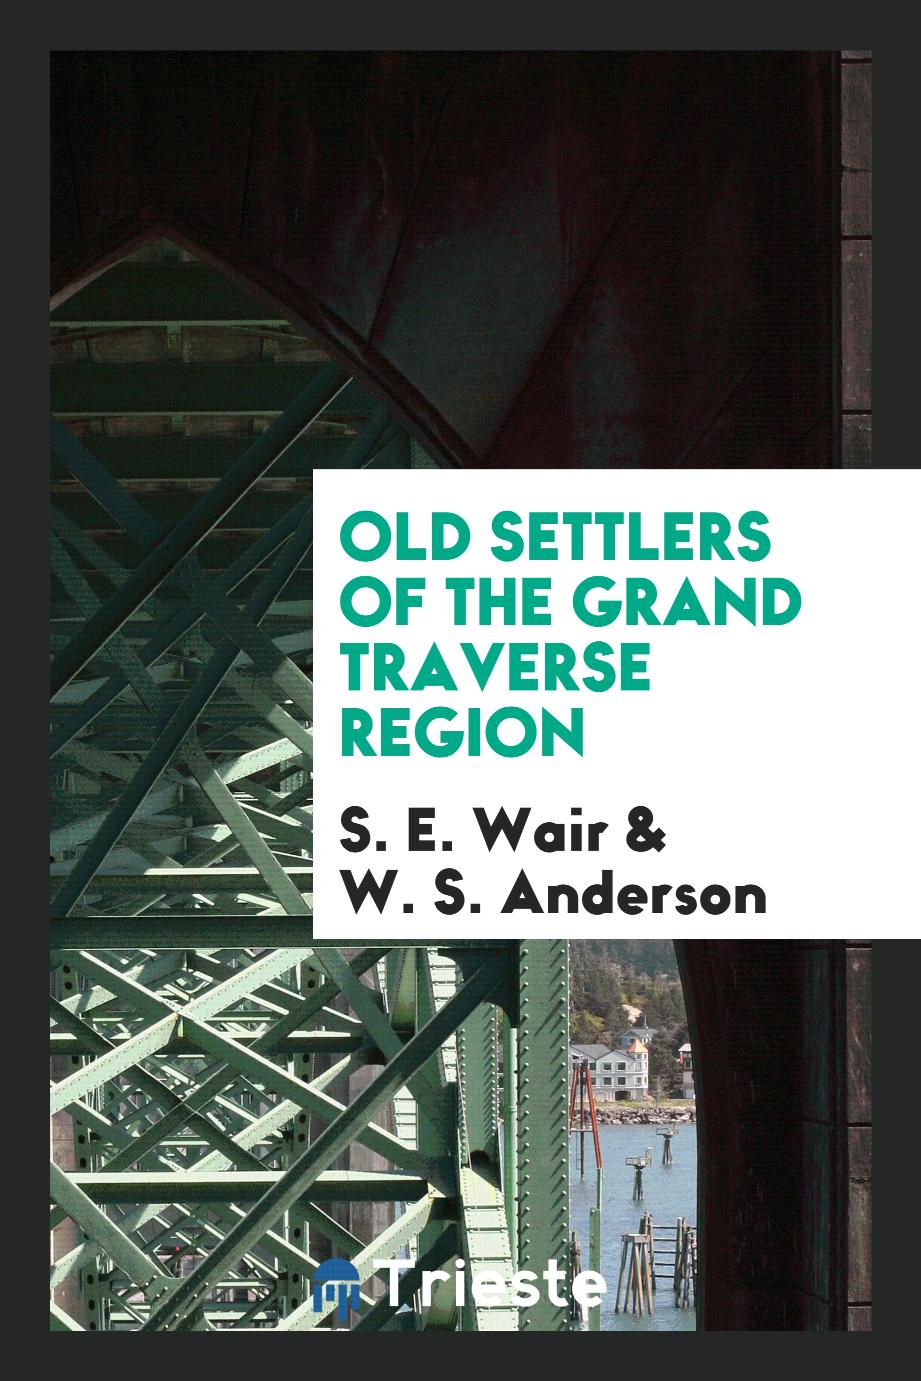 Old Settlers of the Grand Traverse Region